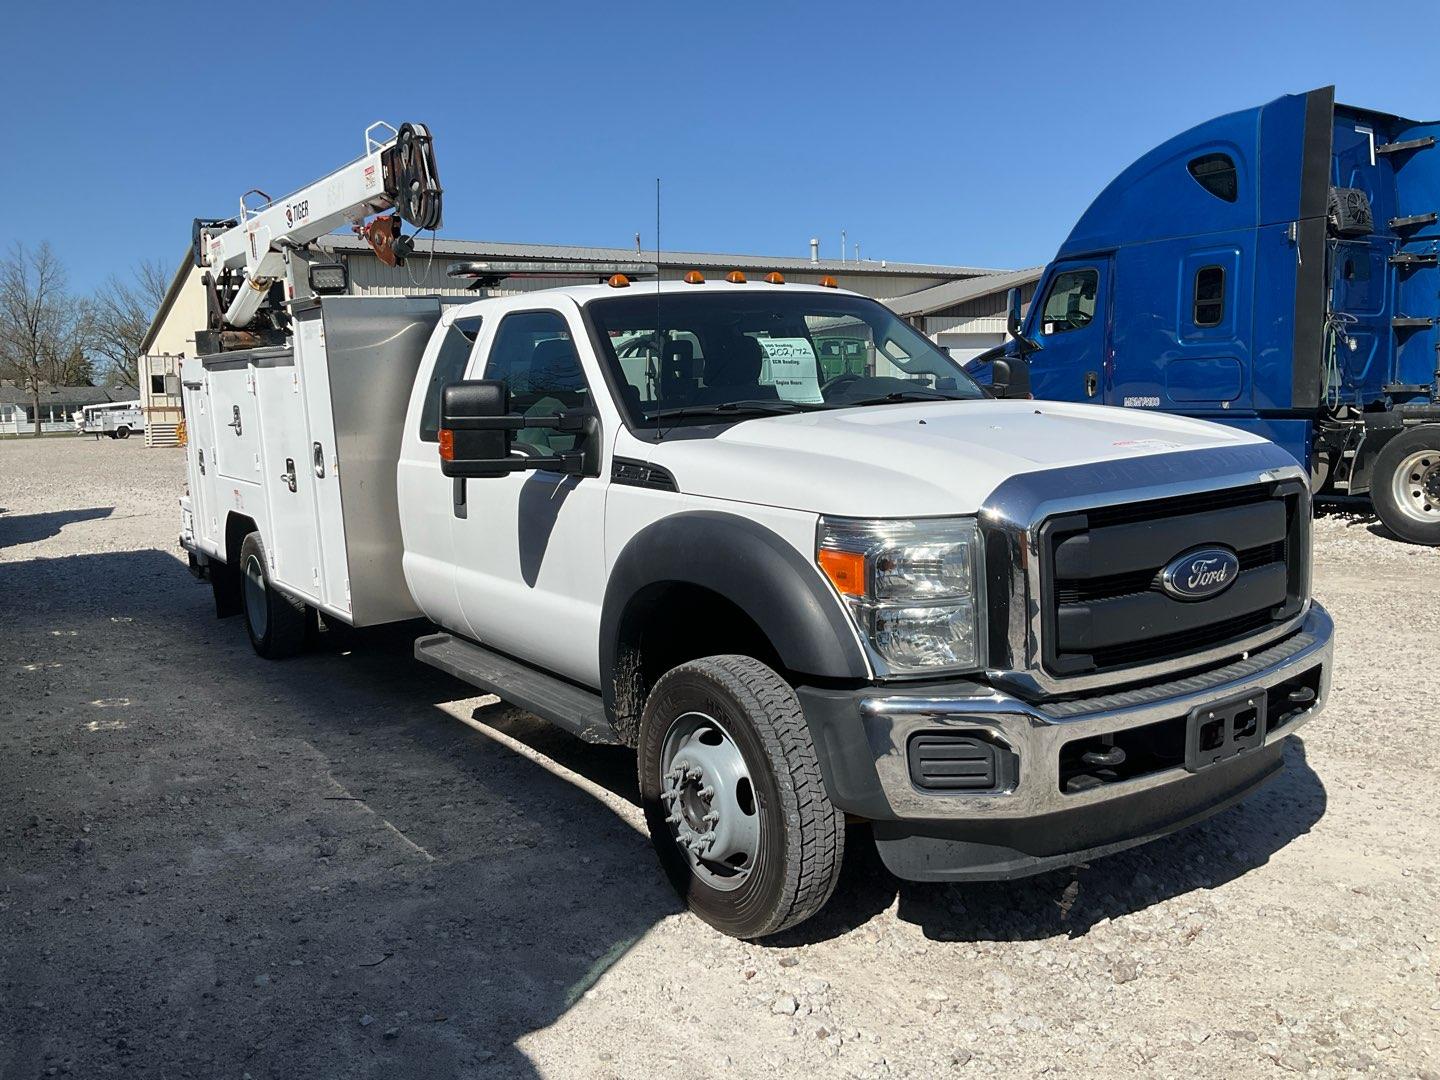 2015 FORD F550 SD XL Serial Number: 1FD0X5HY4FED69289